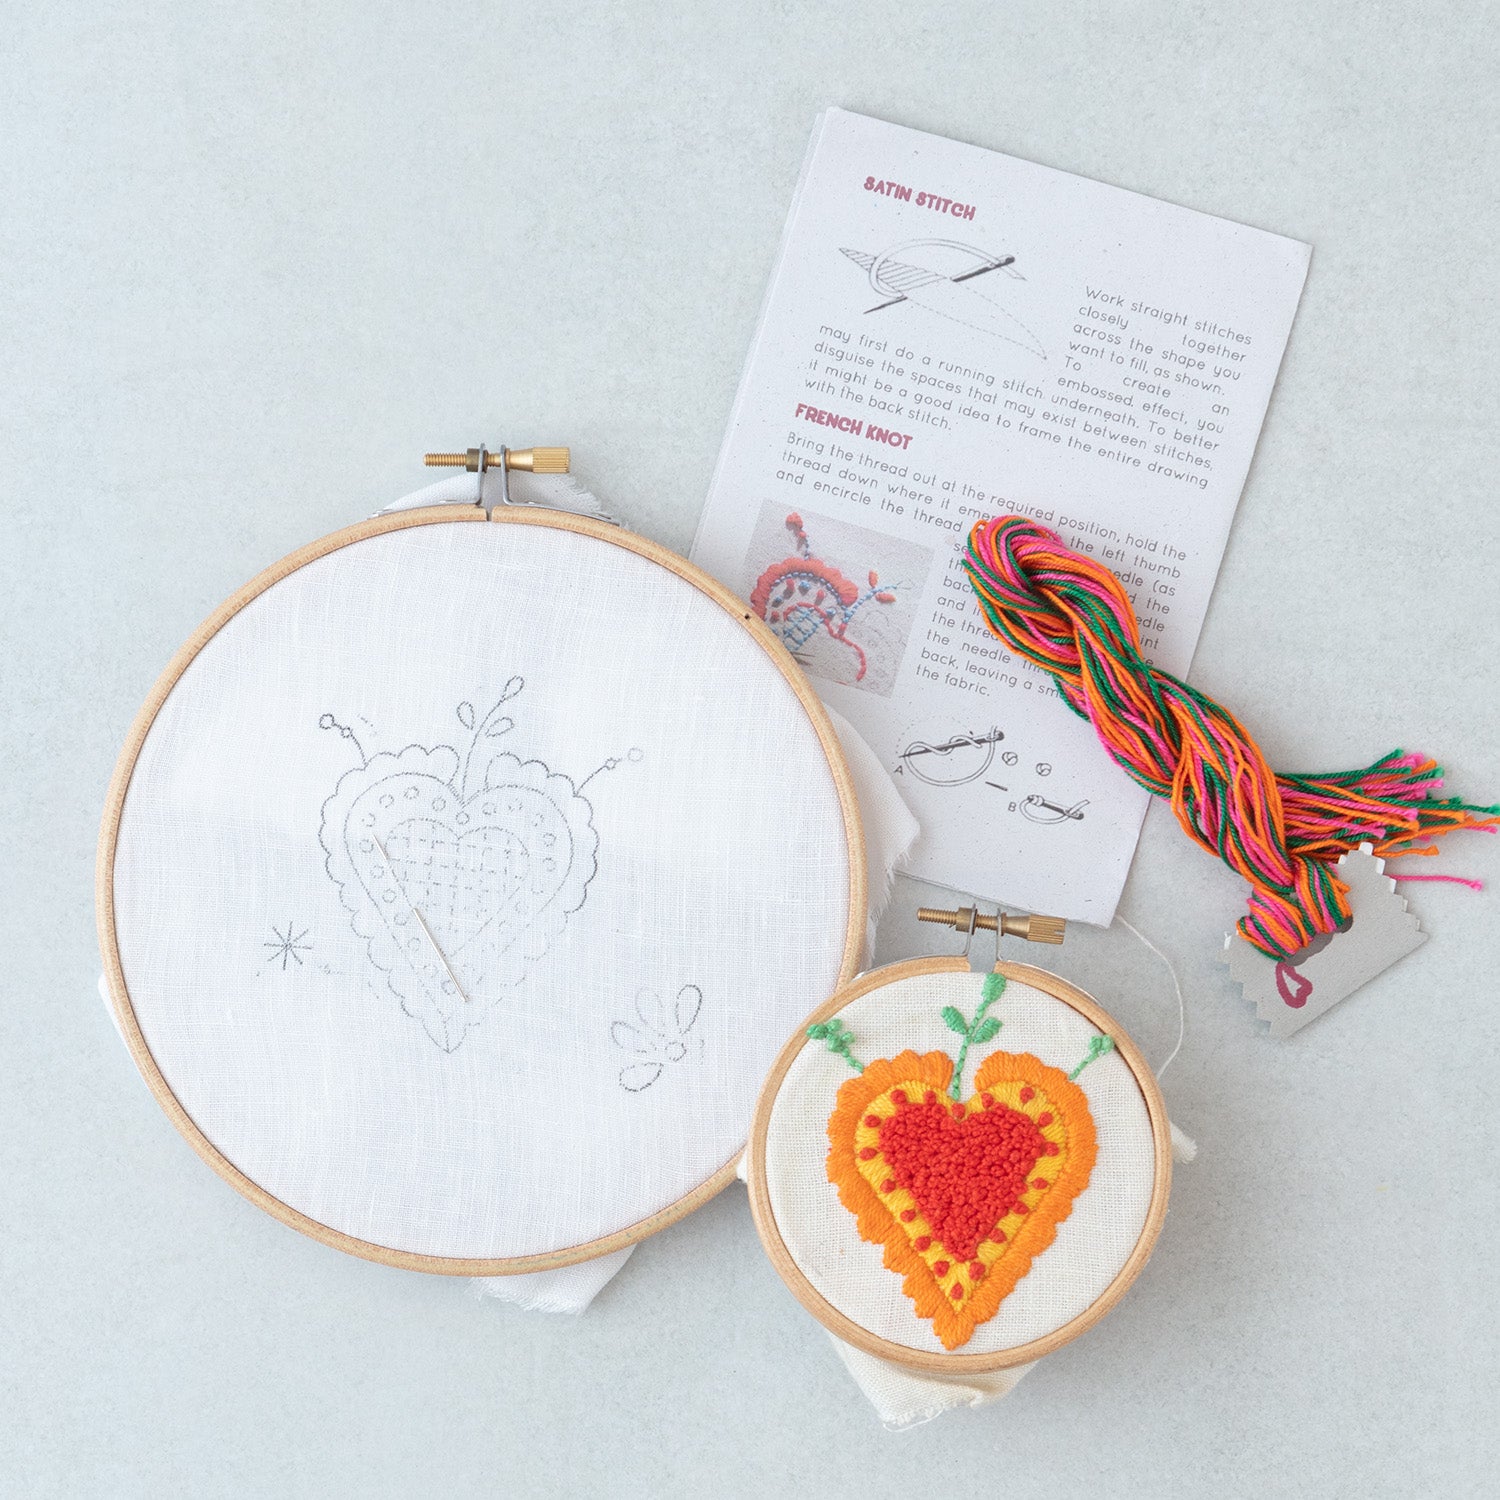 Embroidery Kit for beginners - Viana's heart Portuguese motif